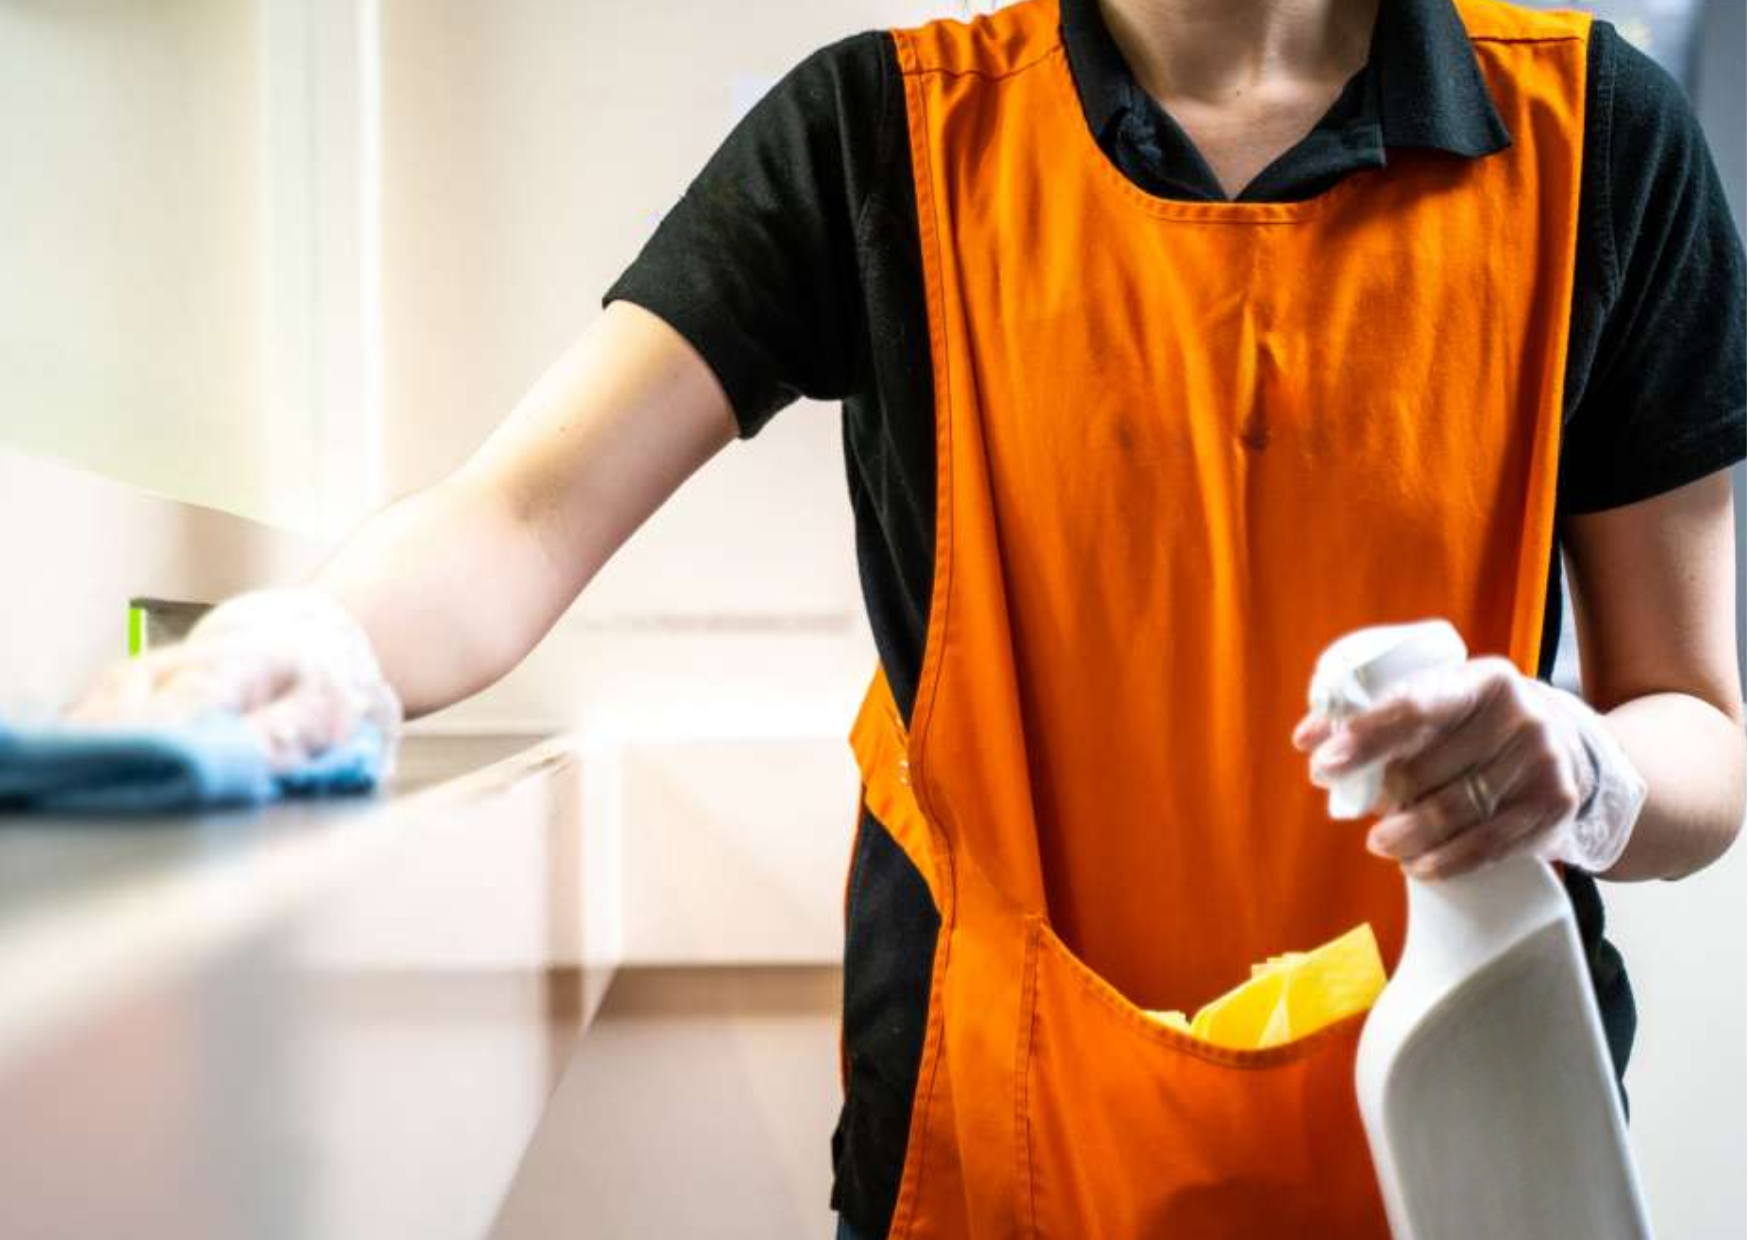 Helping cleaning professionals WorkSmarter